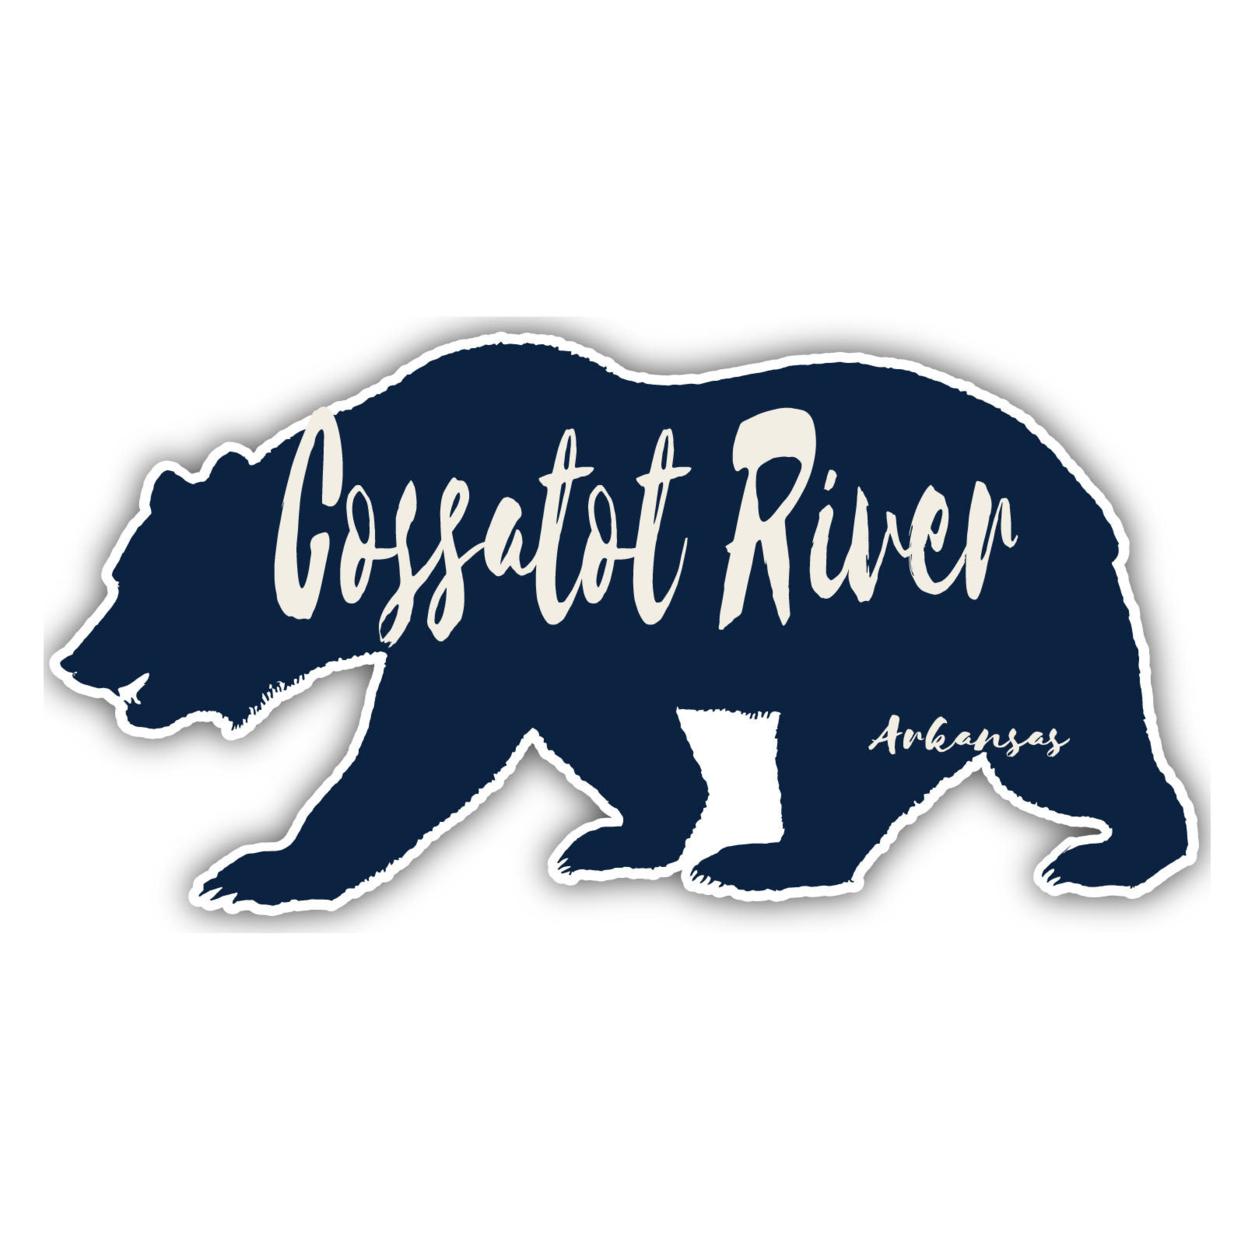 Cossatot River Arkansas Souvenir Decorative Stickers (Choose Theme And Size) - 4-Pack, 4-Inch, Great Outdoors